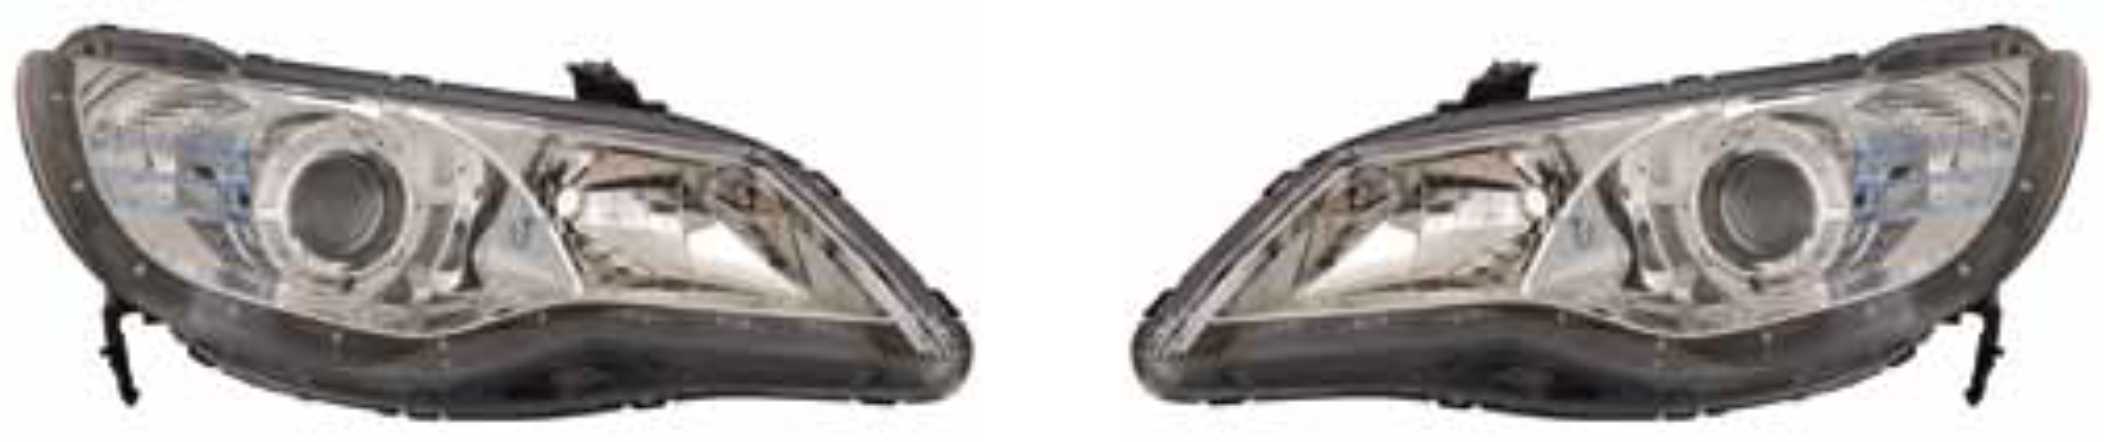 HEA500871 - CIVIC FD 05-08 HEAD LAMP PROJECTION TYPE AFTER MARKET...2004355